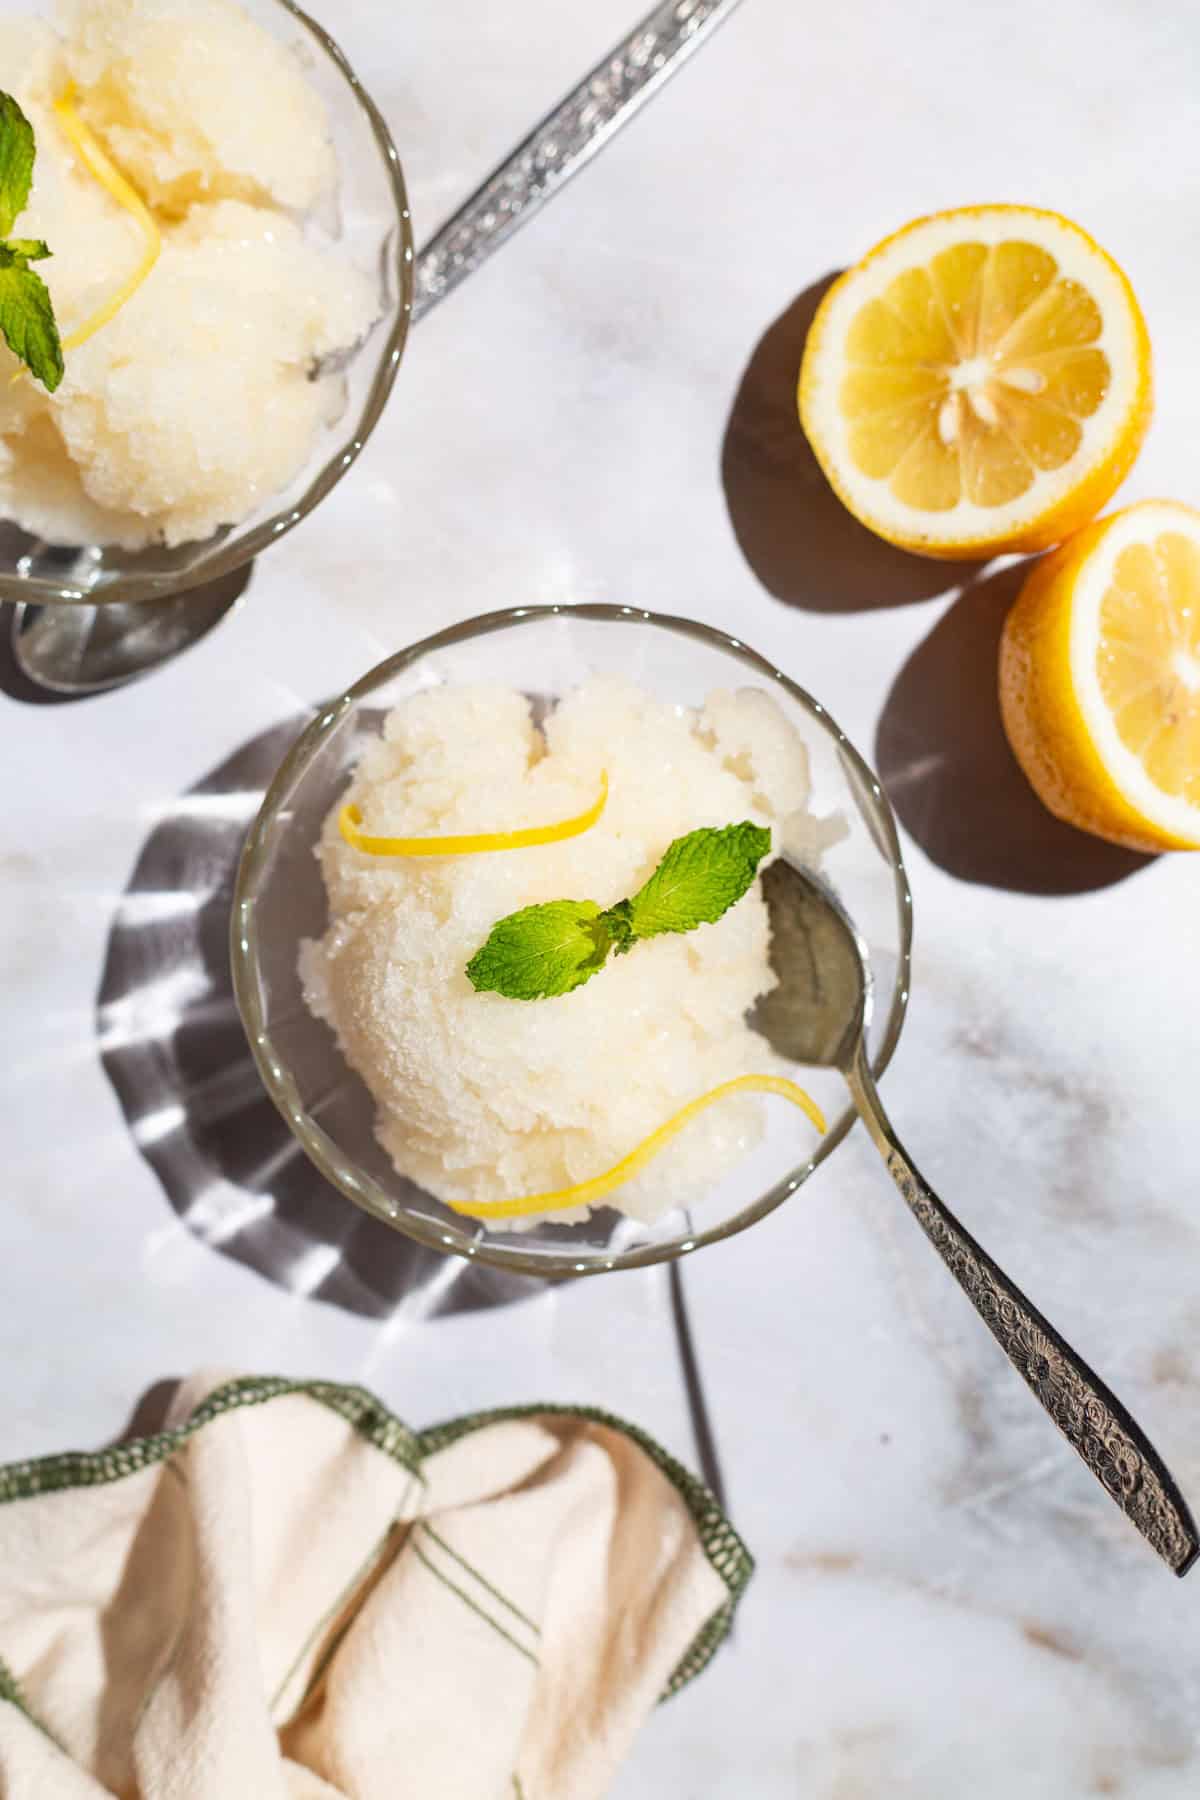 An overhead photo of 2 bowls of lemon sorbet, one with a spoon, and one next to a spoon. Next to these are 2 lemon wheels and a kitchen towel.